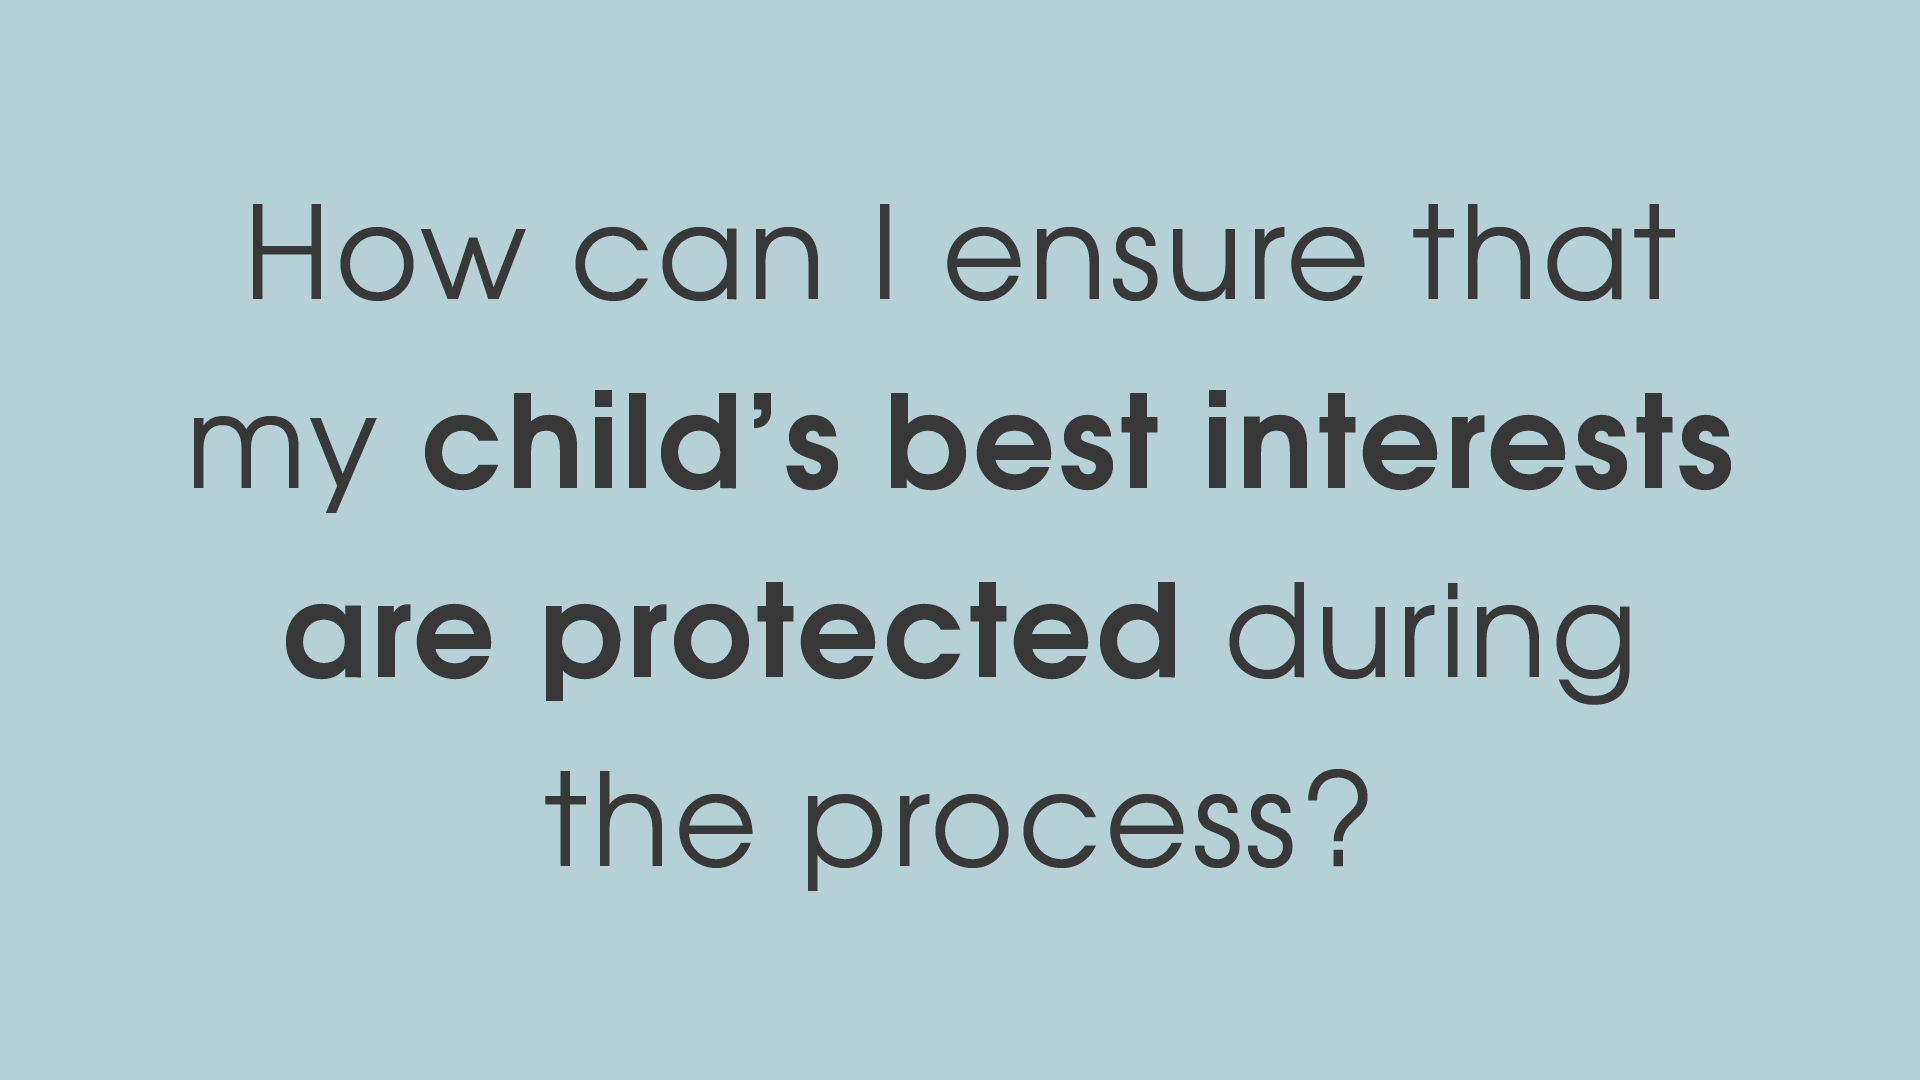 How can I ensure that my child's best interests are protected during the process